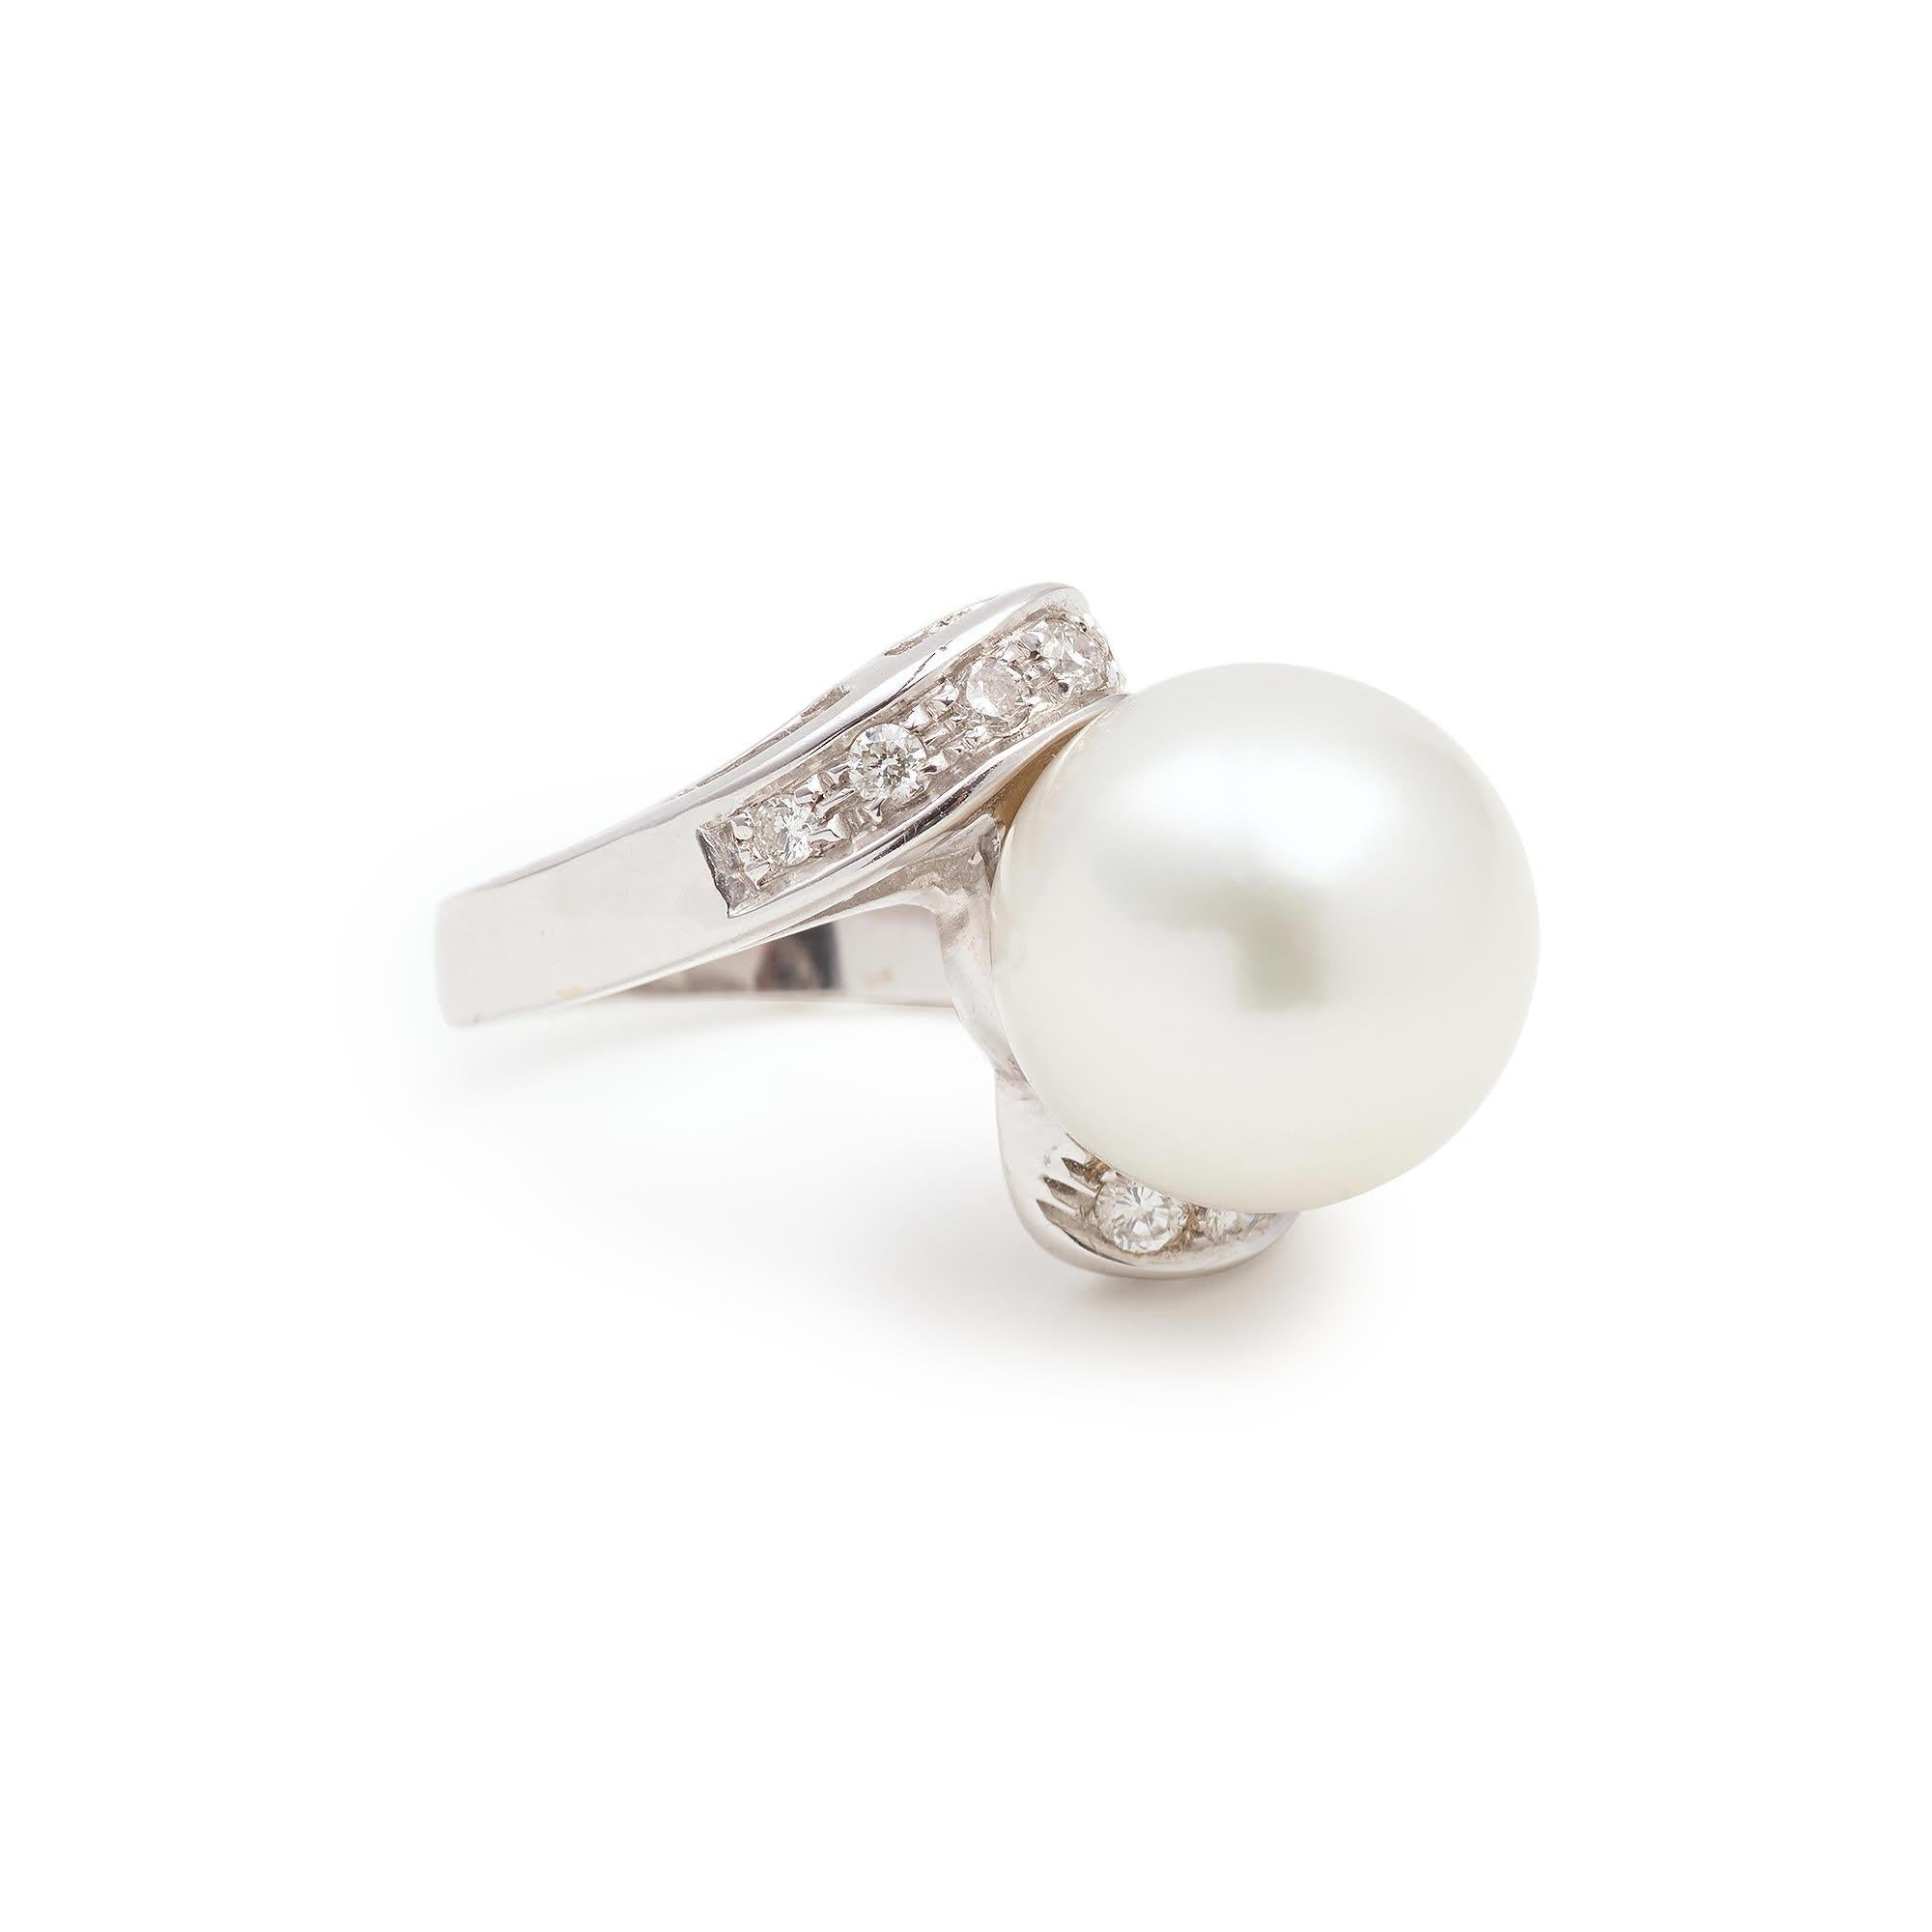 An important White gold ring set with a very nice 13mm cultured pearl and 10 brilliant cut diamonds.

Ring size: 16.71 x 19.13 x 14.92 mm, (0.657 x 0.753 x 0.587 inches)

Ring weight: 9.4 g

Pearl diameter : 12.83 mm, (0.505 inches)

Total